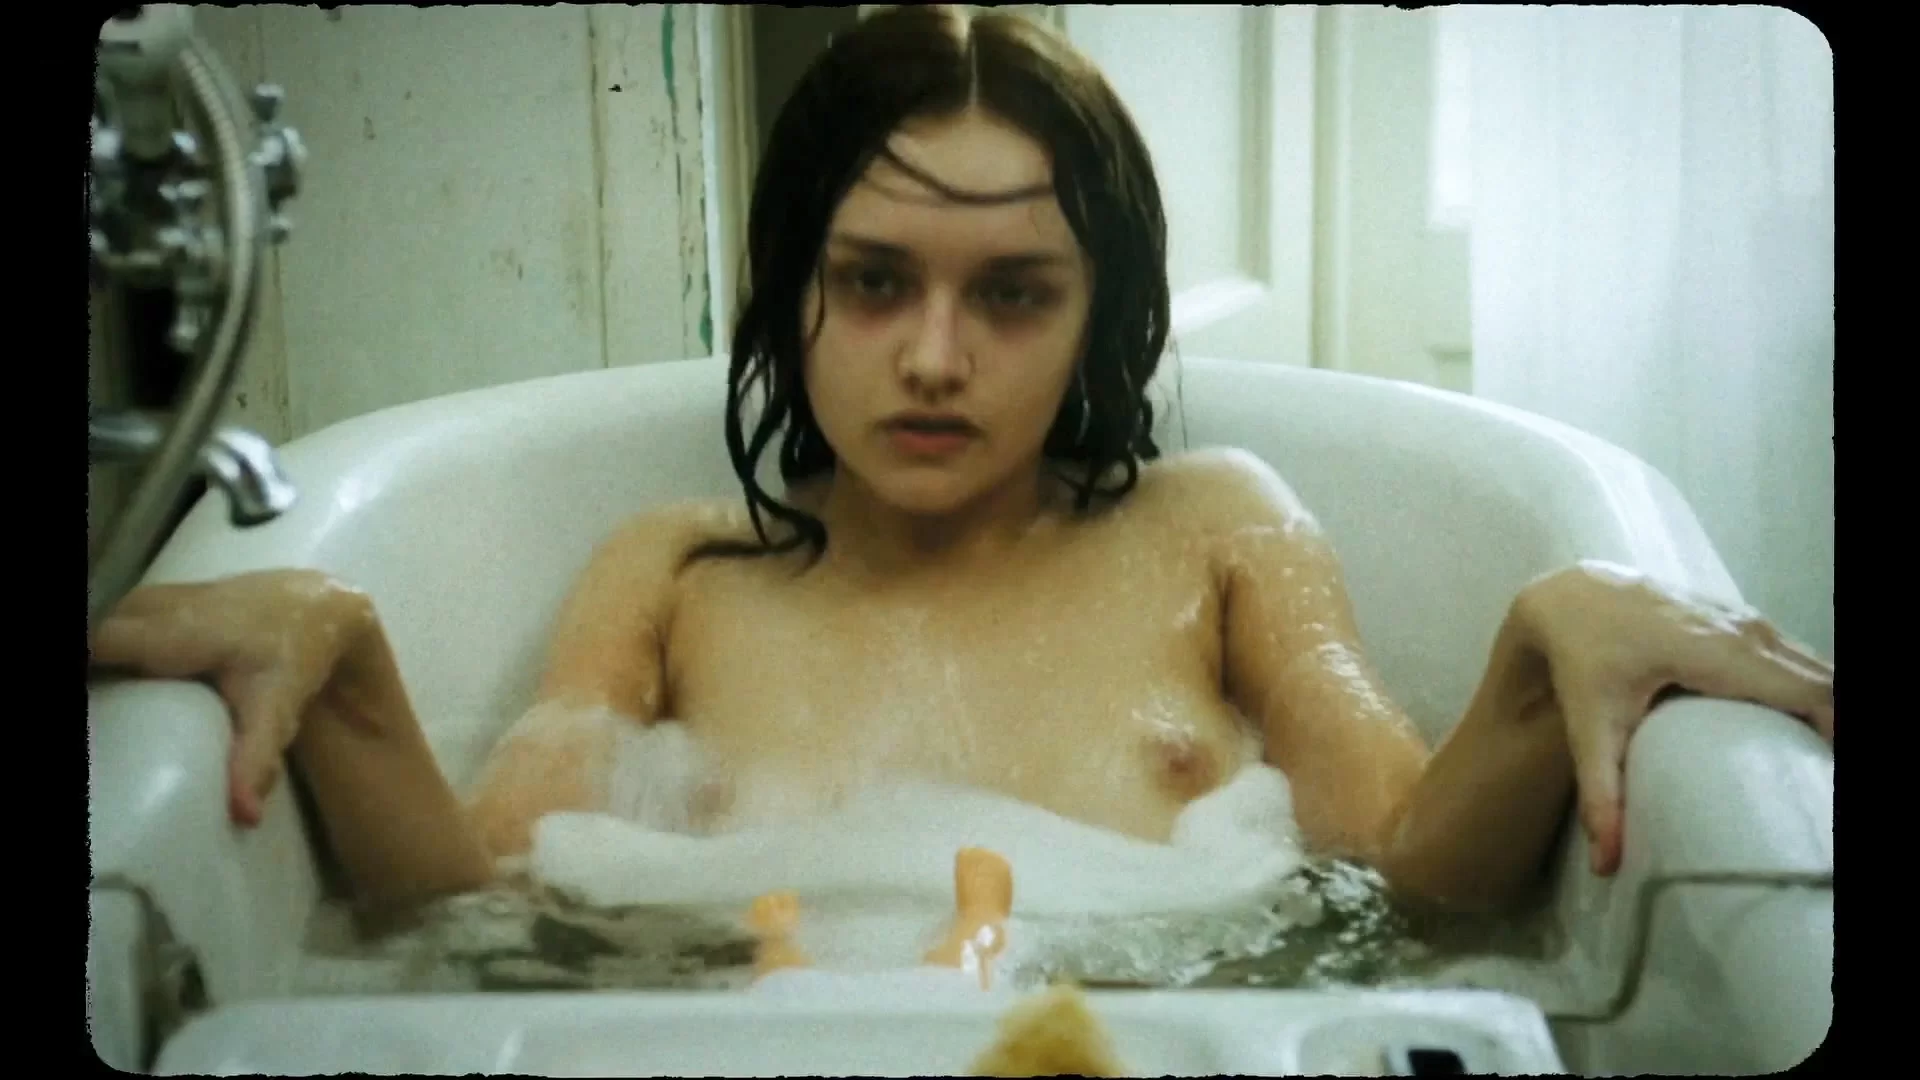 Olivia Cooke - The Quiet Ones (2014) / Embed Player.